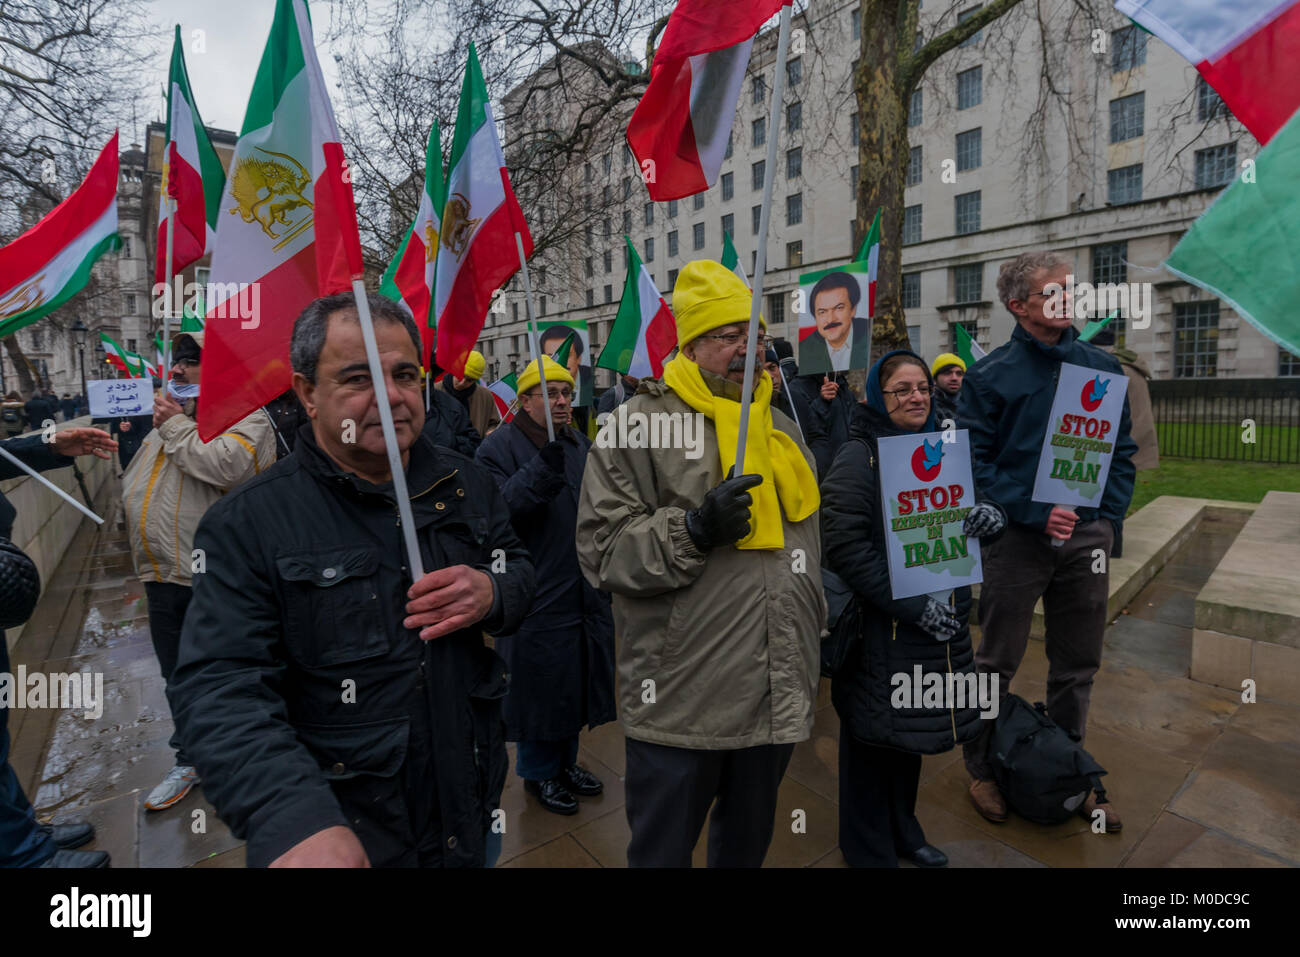 January 20, 2018 - London, UK. 20th January 2018. Protesters opposite Downing St urged UK Prime Minister Theresa May to break her silence over the uprising in Iran and call for the immediate release of the thousands arrested and under threat of the death penalty. The protest was organised by the French-based National Council of Resistance of Iran (NCRI) and associated PMOI/MEK, an Iranian political''“militant organization in exile, and claims to represent 40 Anglo-Iranian communities. There were a wide range of speakers including several MPs. Credit: ZUMA Press, Inc./Alamy Live News Stock Photo